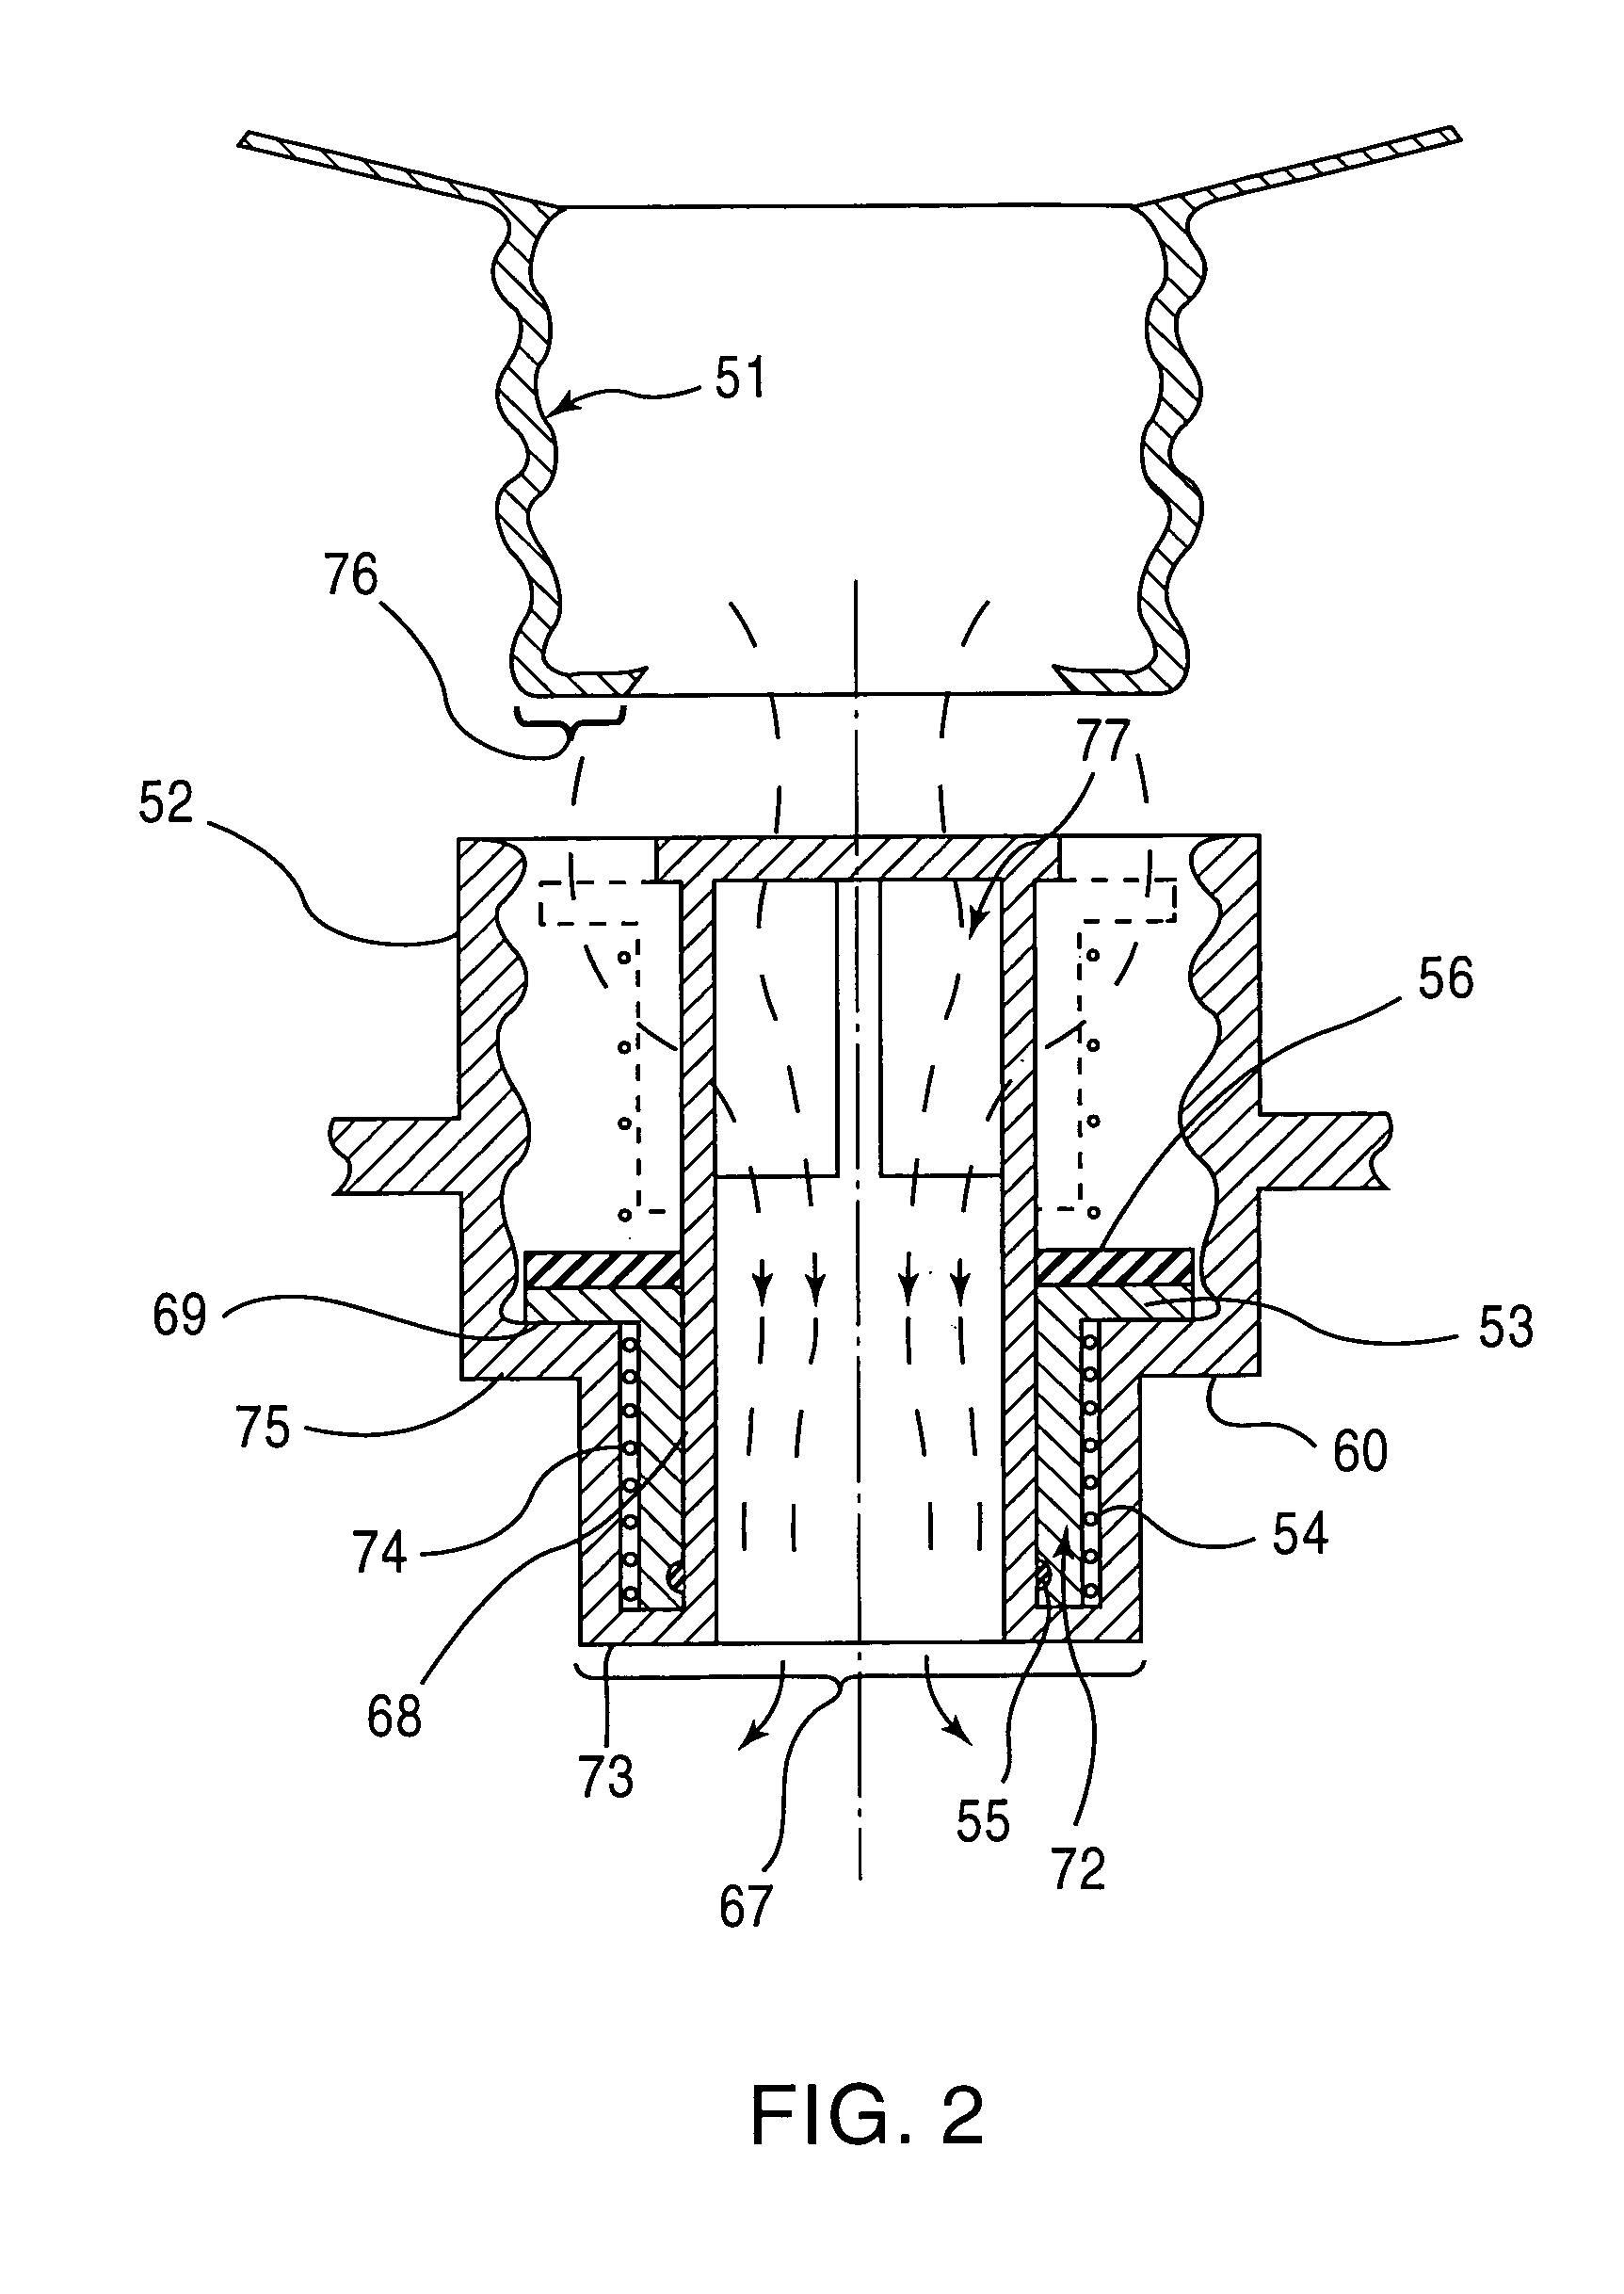 Self-sealing protection filter port